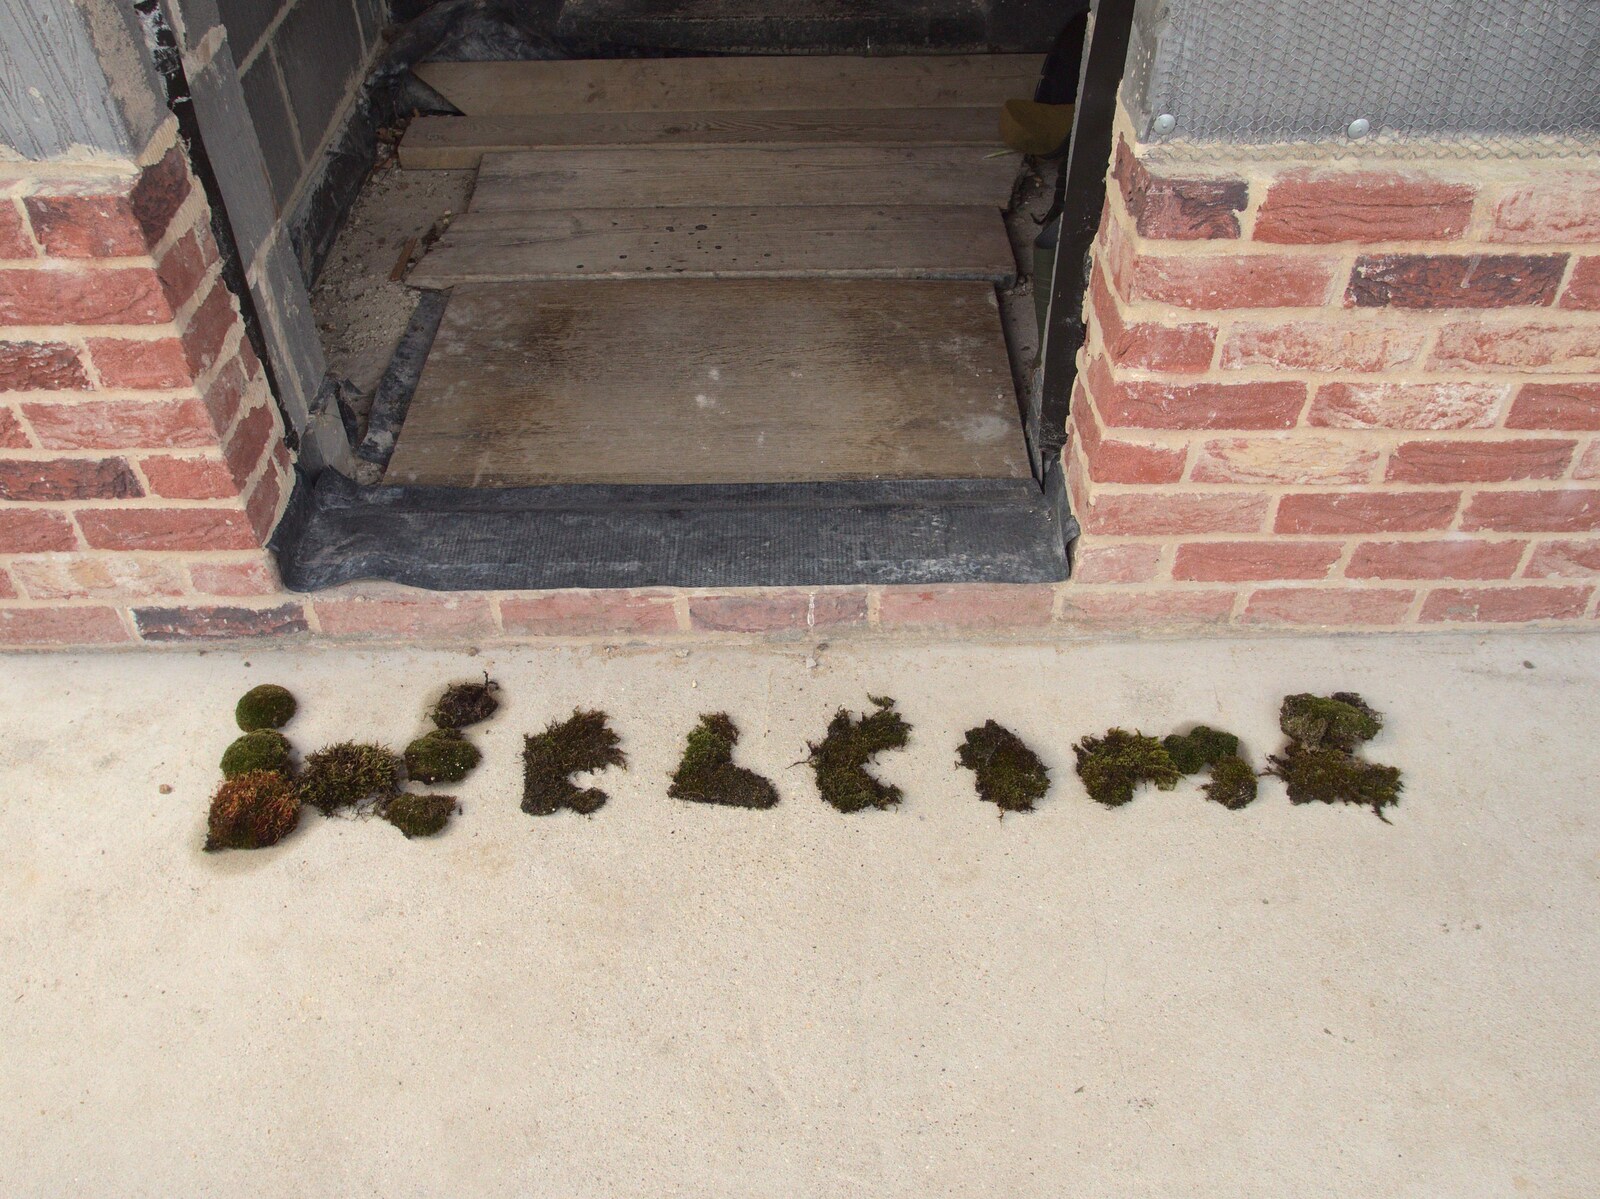 Isobel makes a cute mossy welcome mat from A Derelict Petrol Station, Palgrave, Suffolk - 16th May 2015